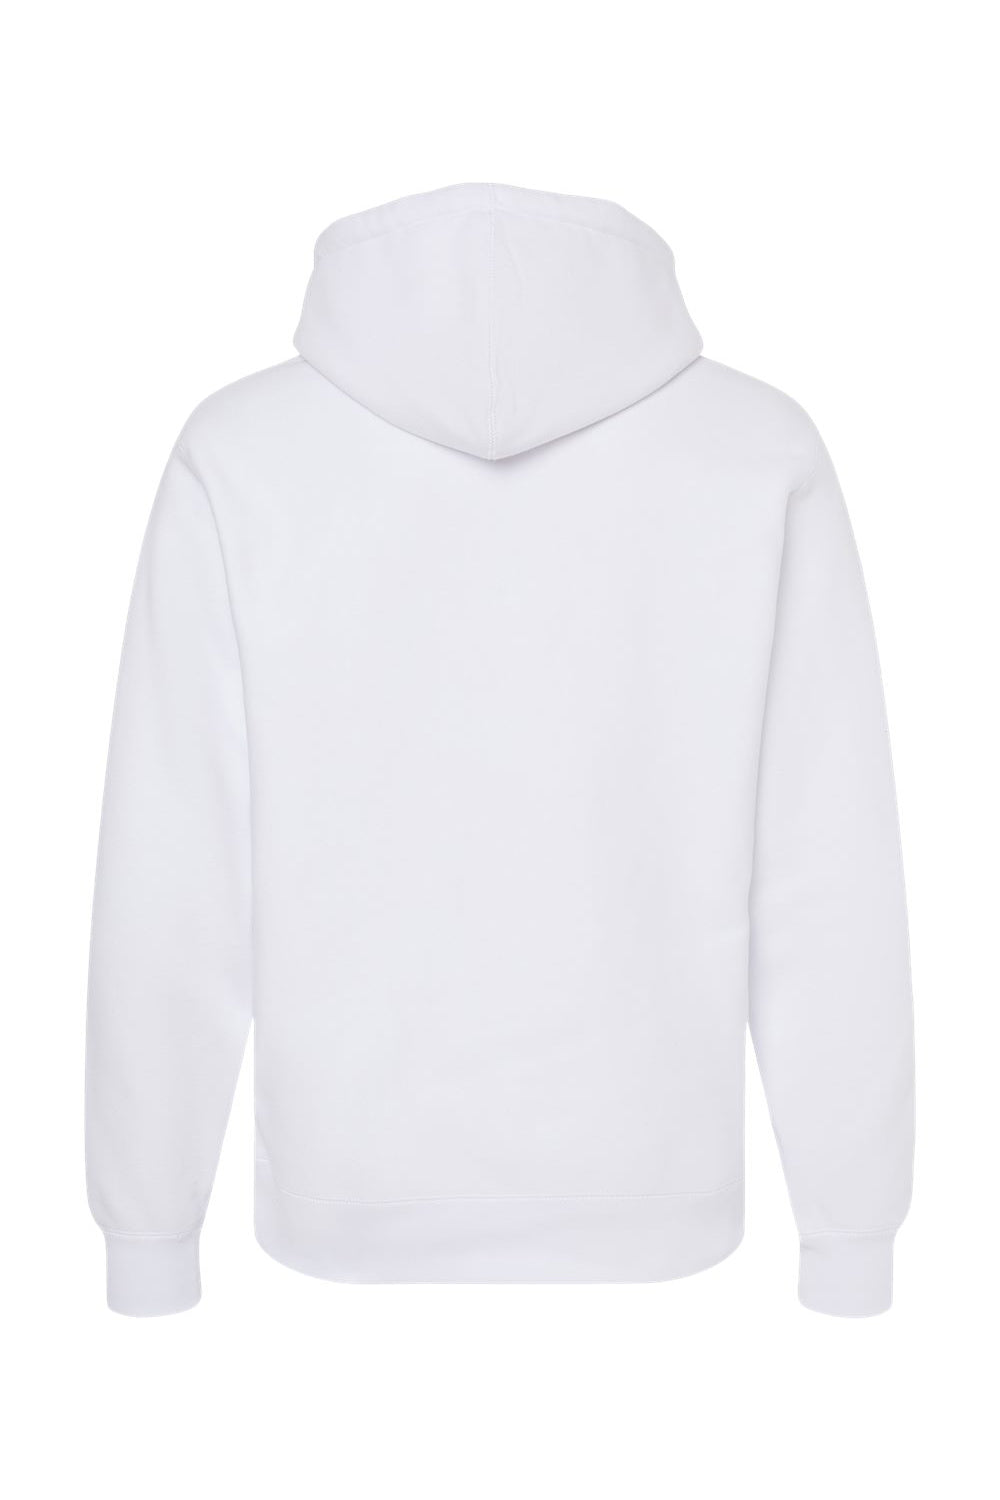 Independent Trading Co. IND5000P Mens Legend Hooded Sweatshirt Hoodie White Flat Back